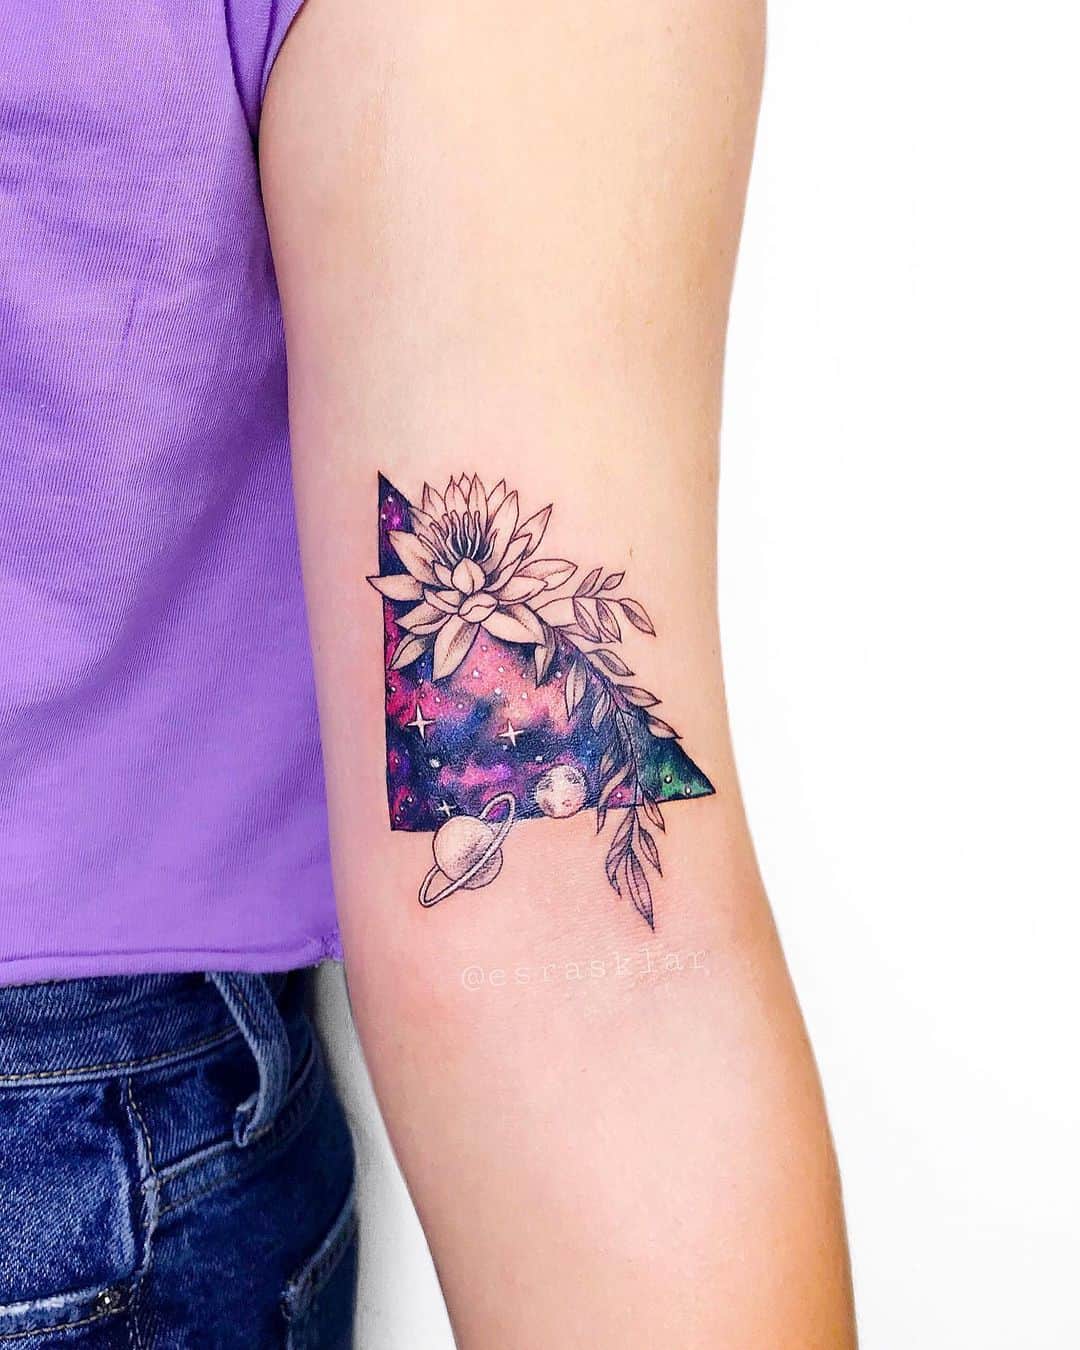 39 Brilliant Cover-up Tattoos with Before and After - Our Mindful Life